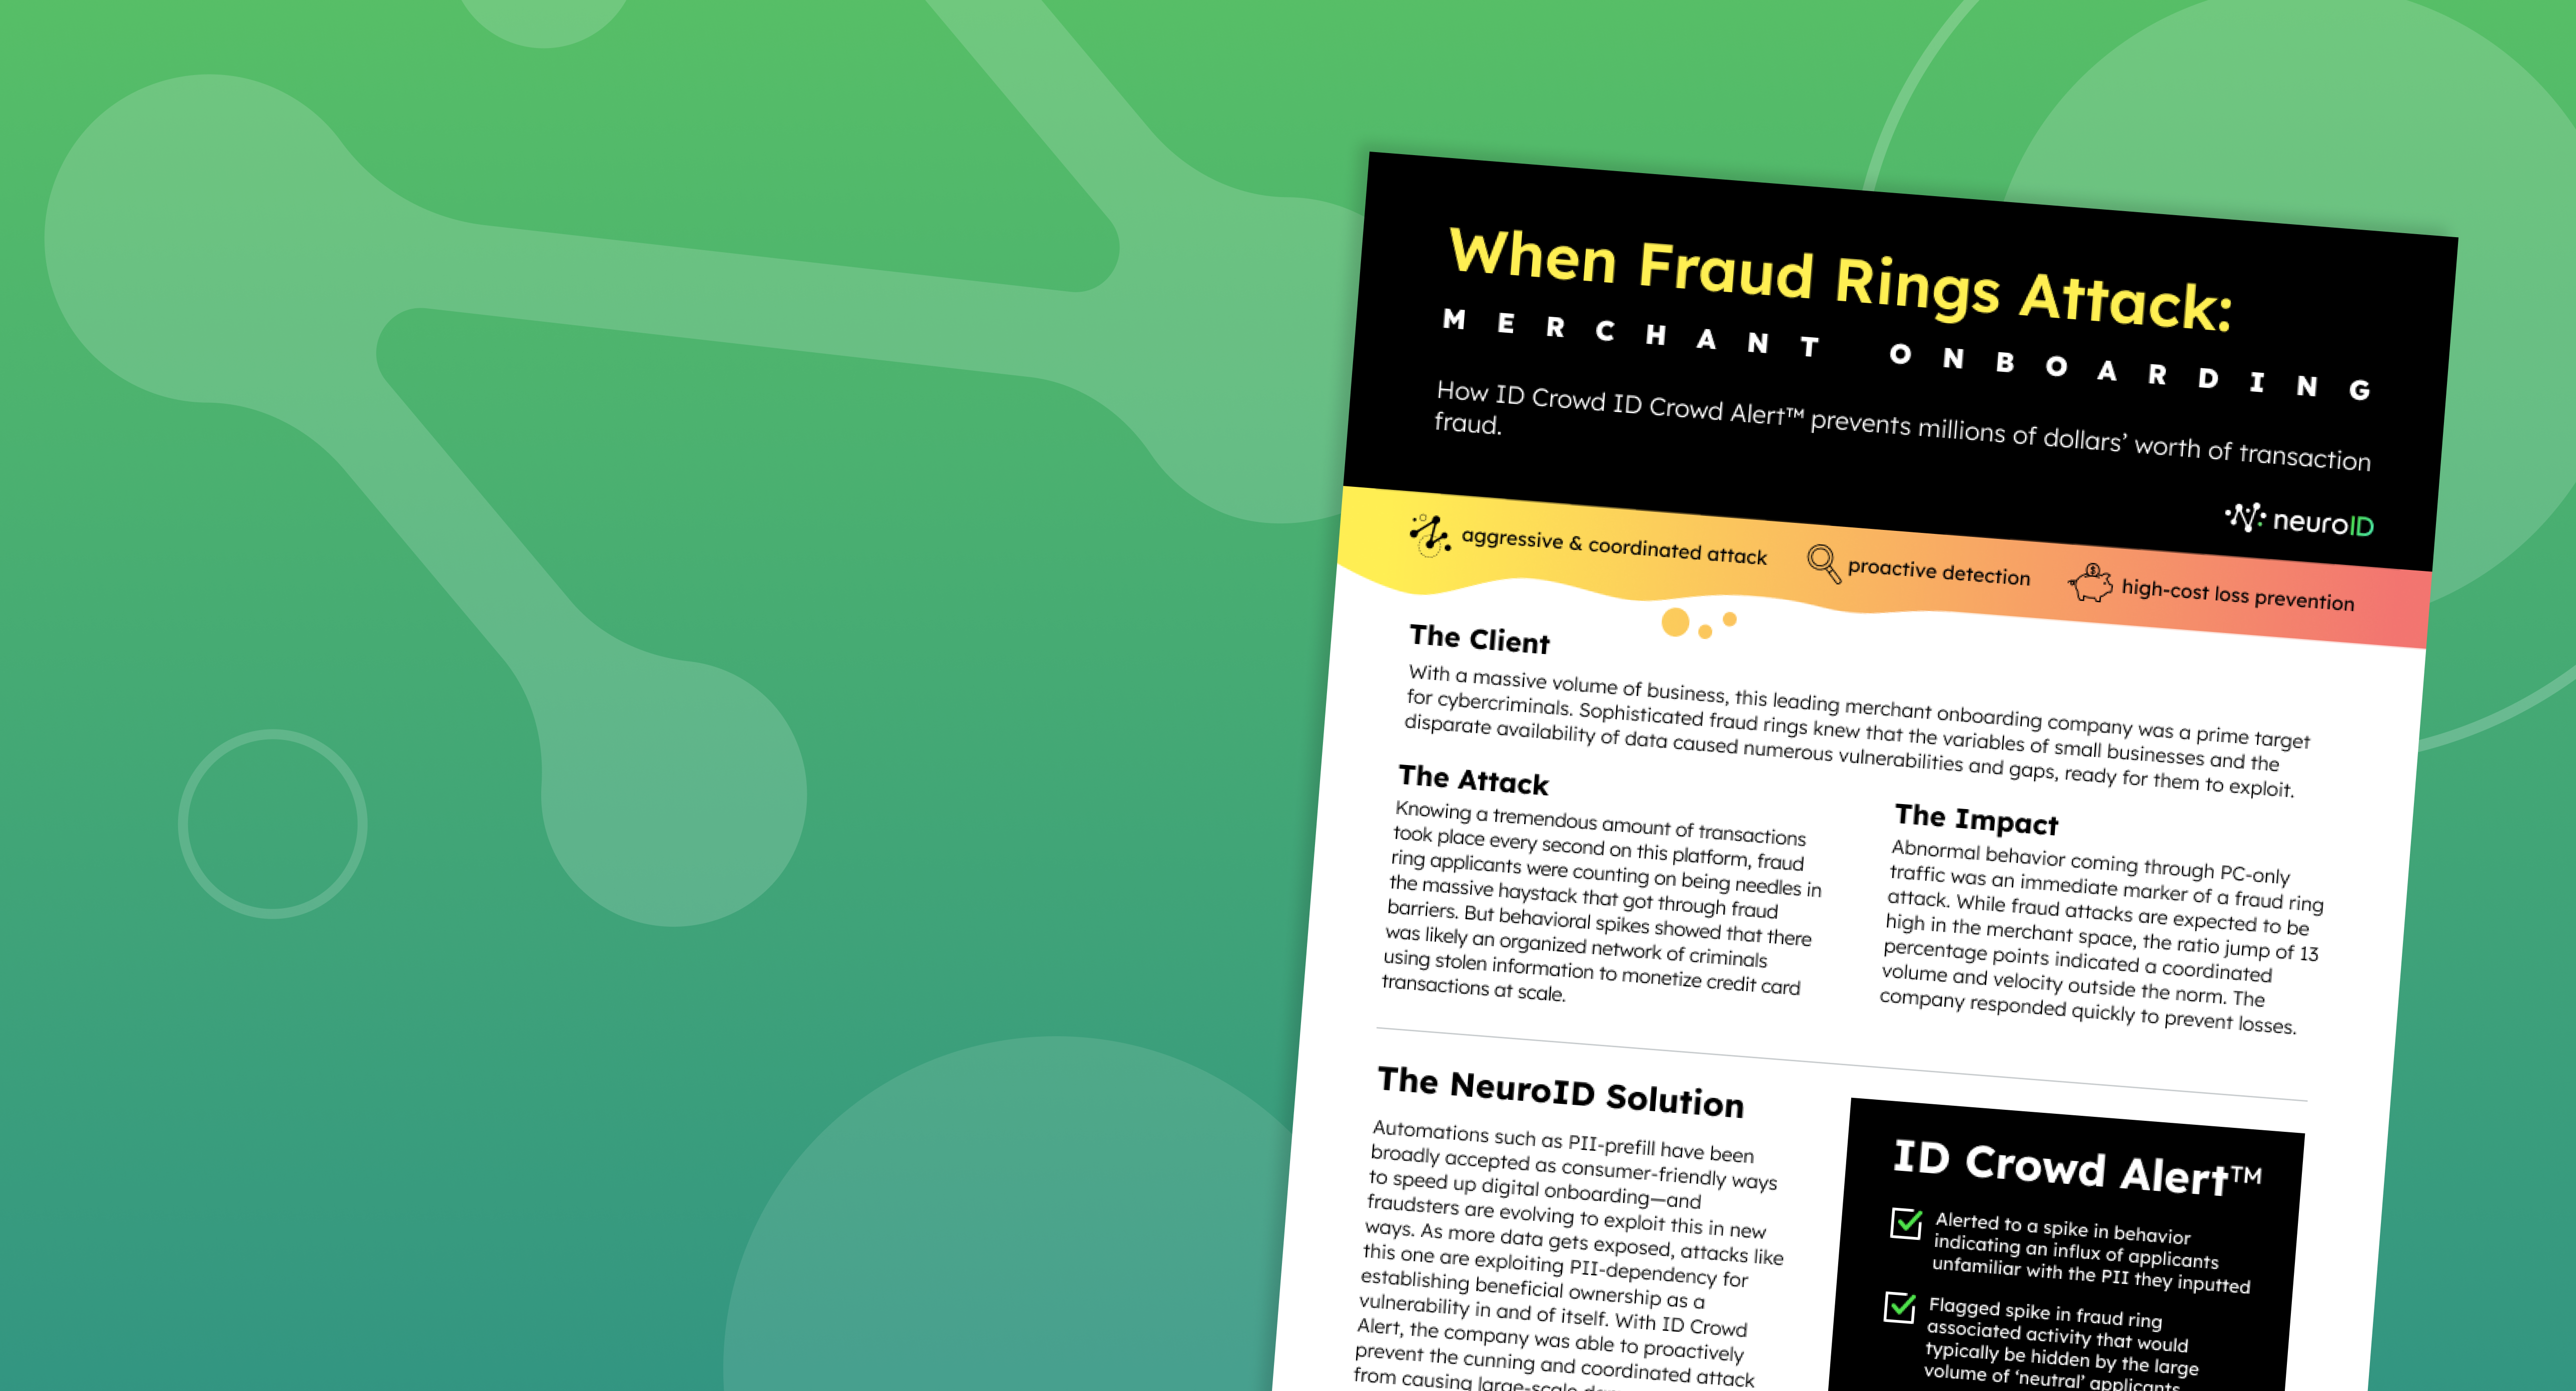 When Fraud Rings Attack: Merchant Onboarding